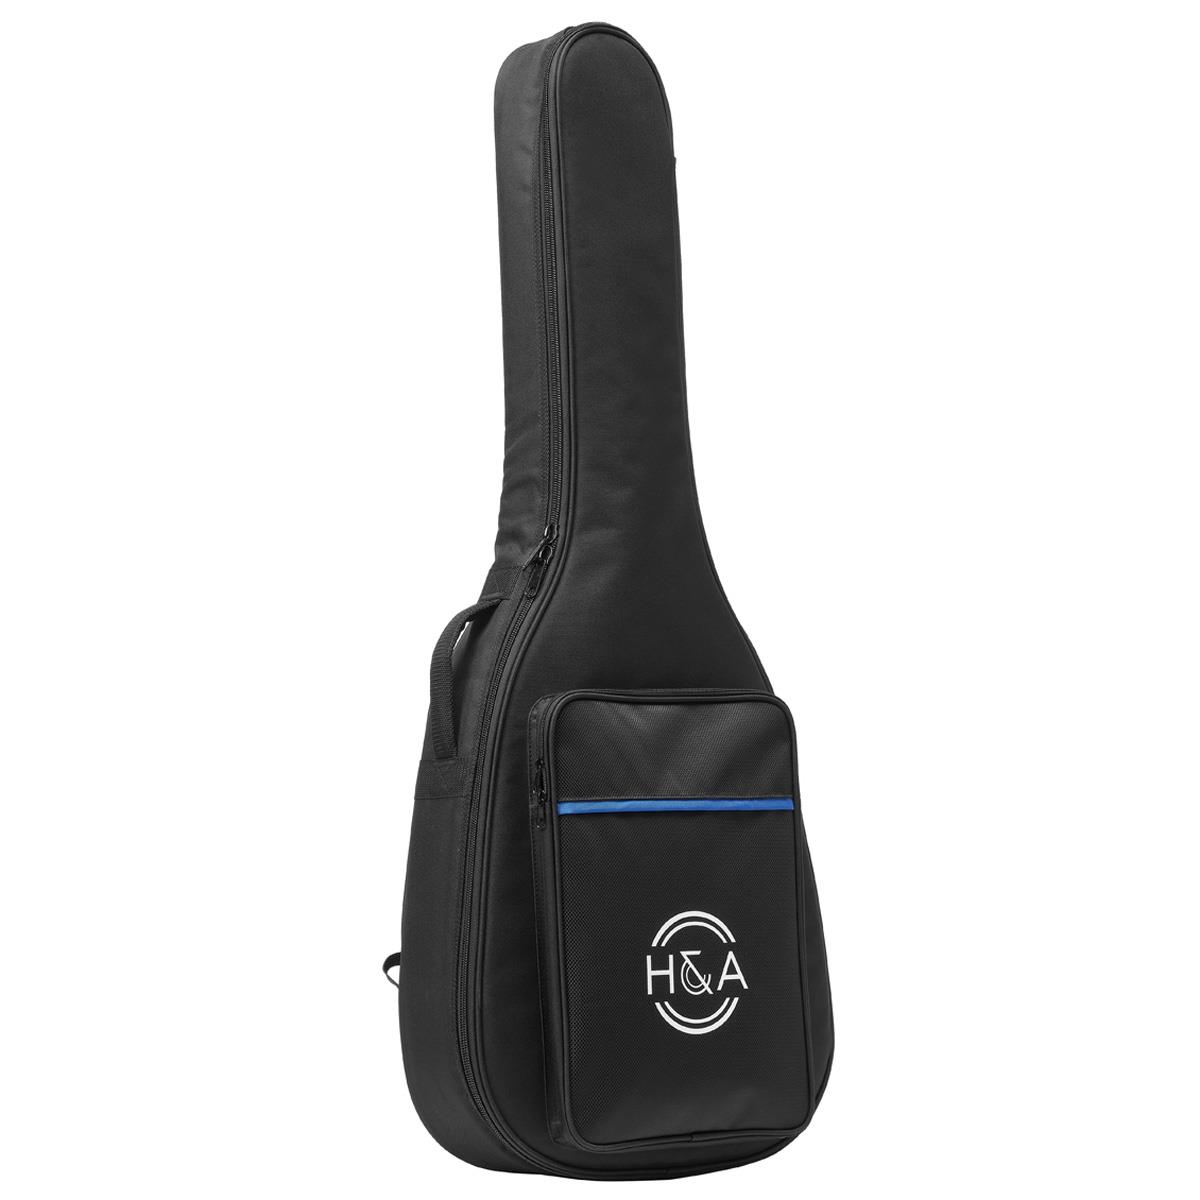 

H&A Deluxe Gig Bag for Acoustic Guitars